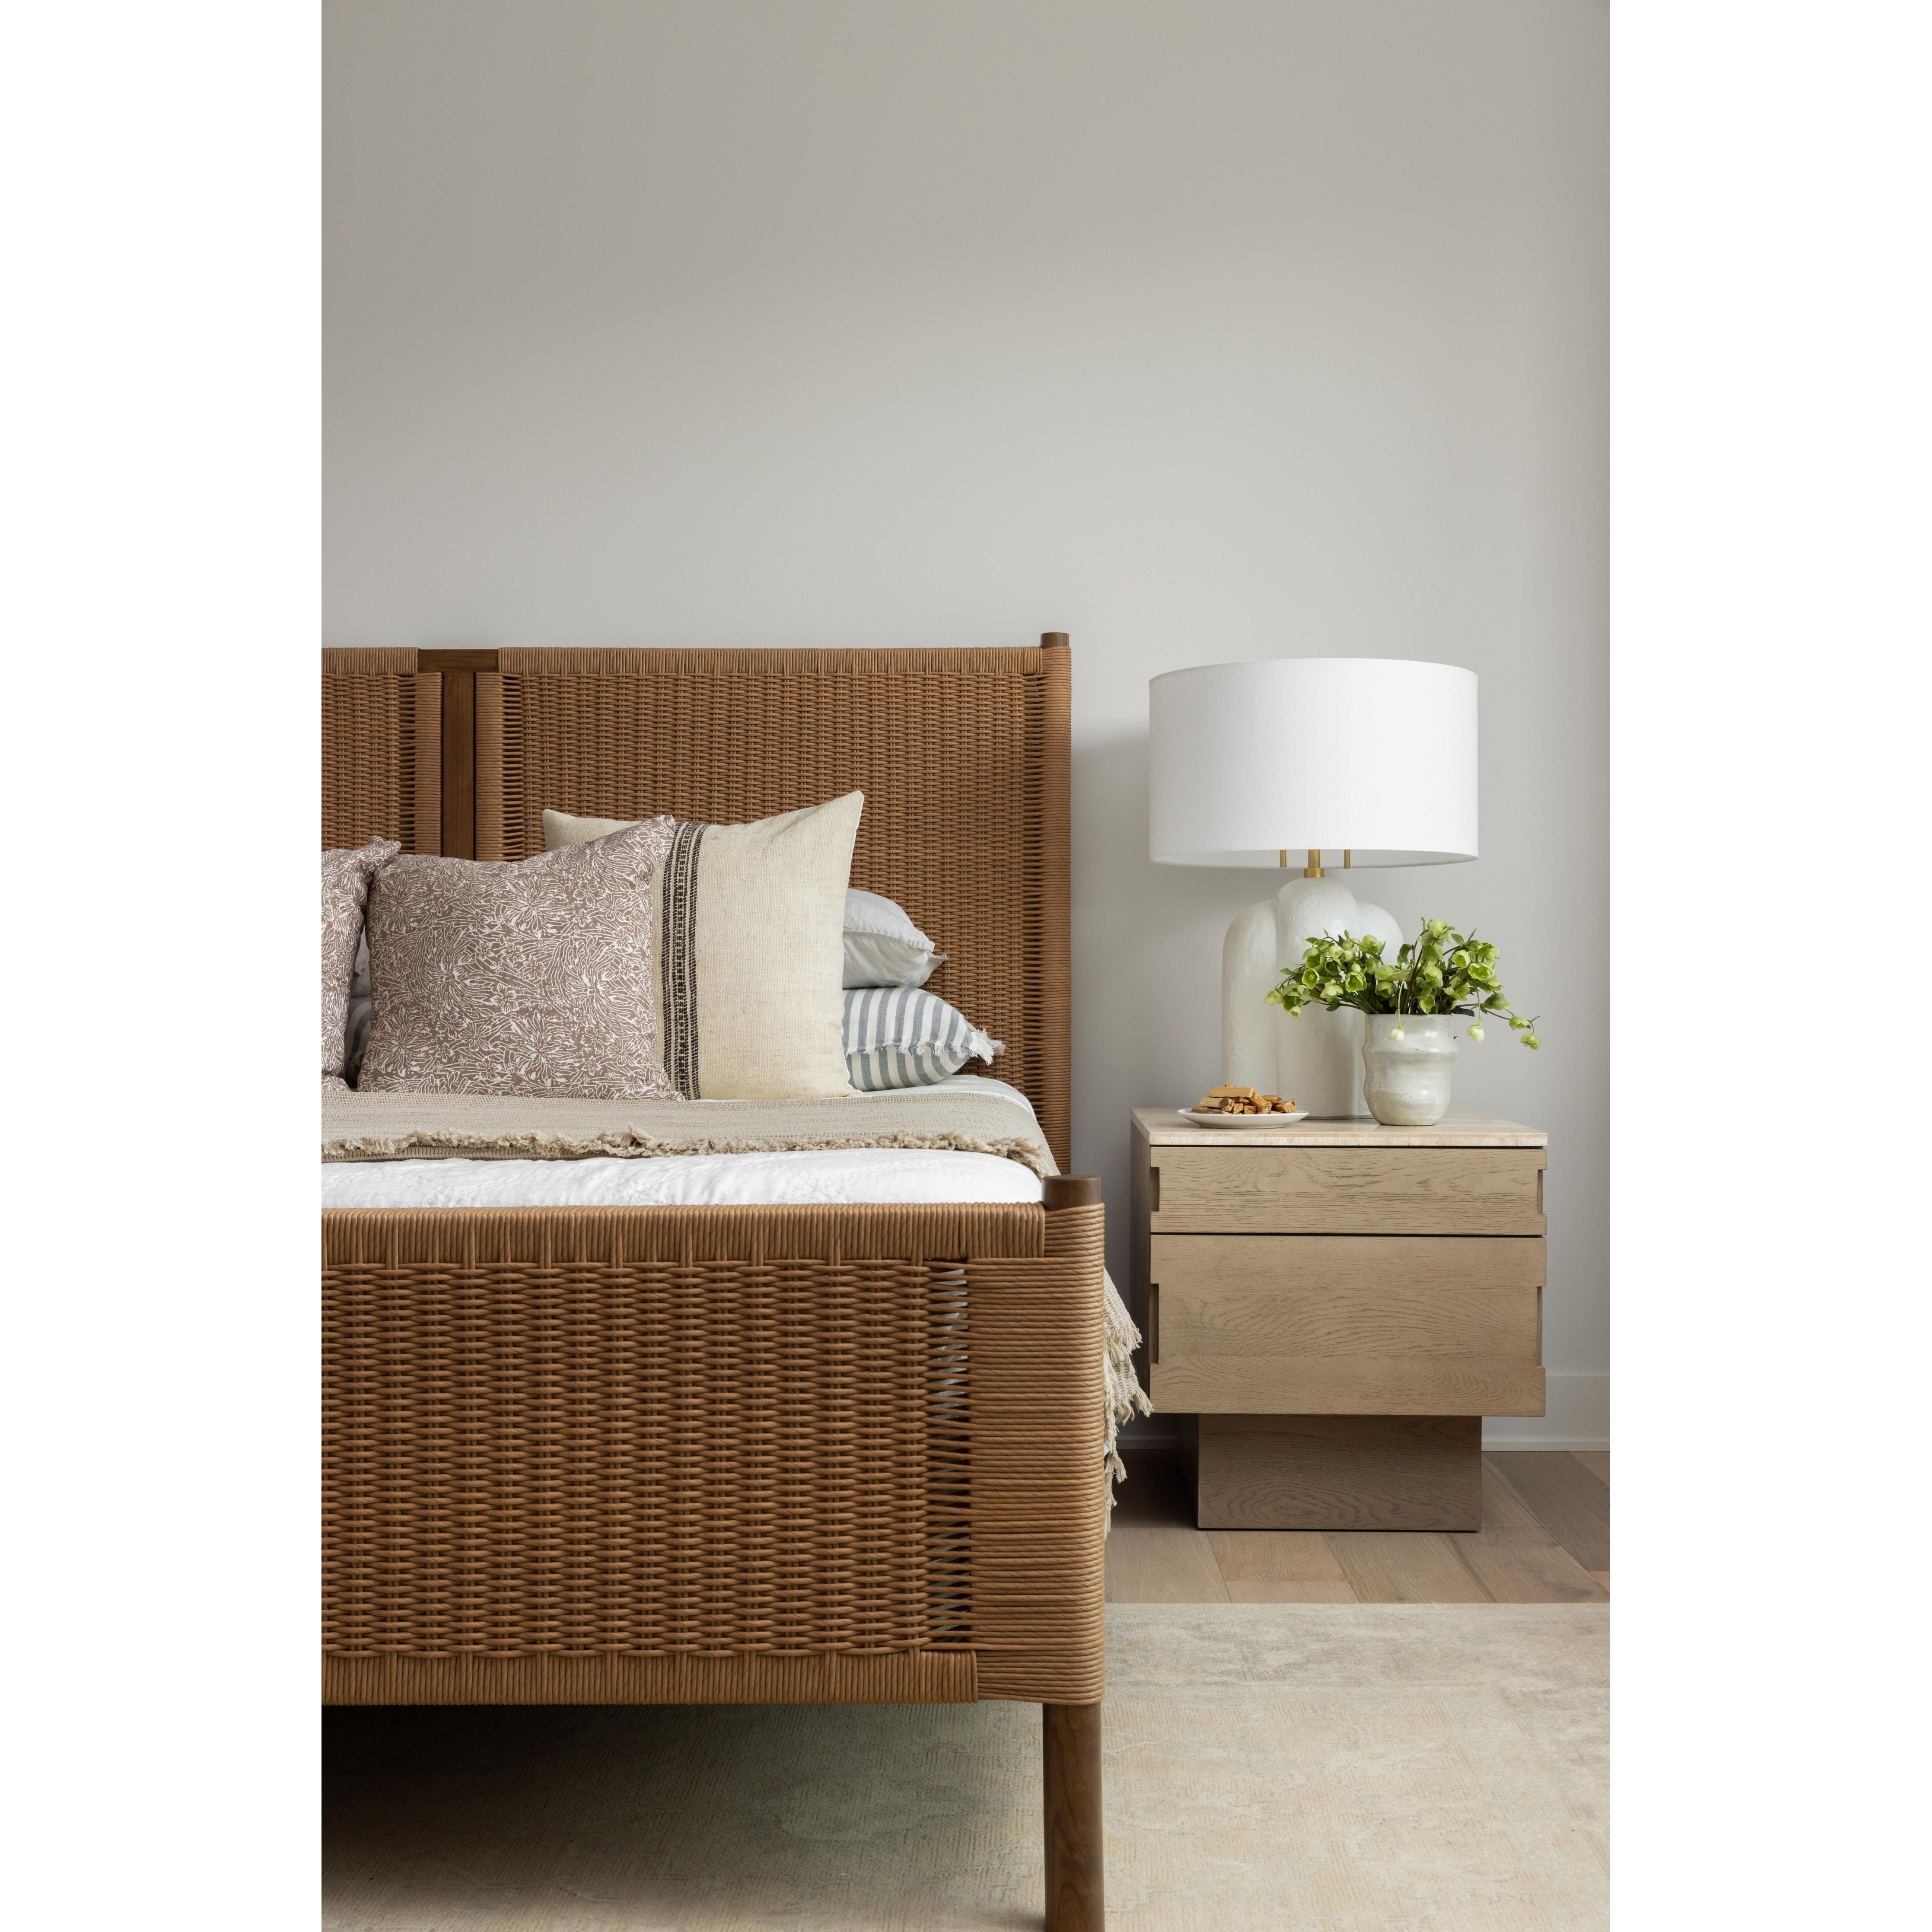 Introducing the Jaylen Nightstand in Yucca Oak, a must-have addition to any modern coastal-inspired bedroom design. Pair it with white plaster lighting and a Turkish oushak rug for a cohesive look in your Nashville, Florida, or Utah home design. Elevate your bedroom with the Jaylen Nightstand and enjoy its perfect blend of style and functionality. Add it to your space and enjoy the convenience of extra storage space and a sleek design at your bedside.